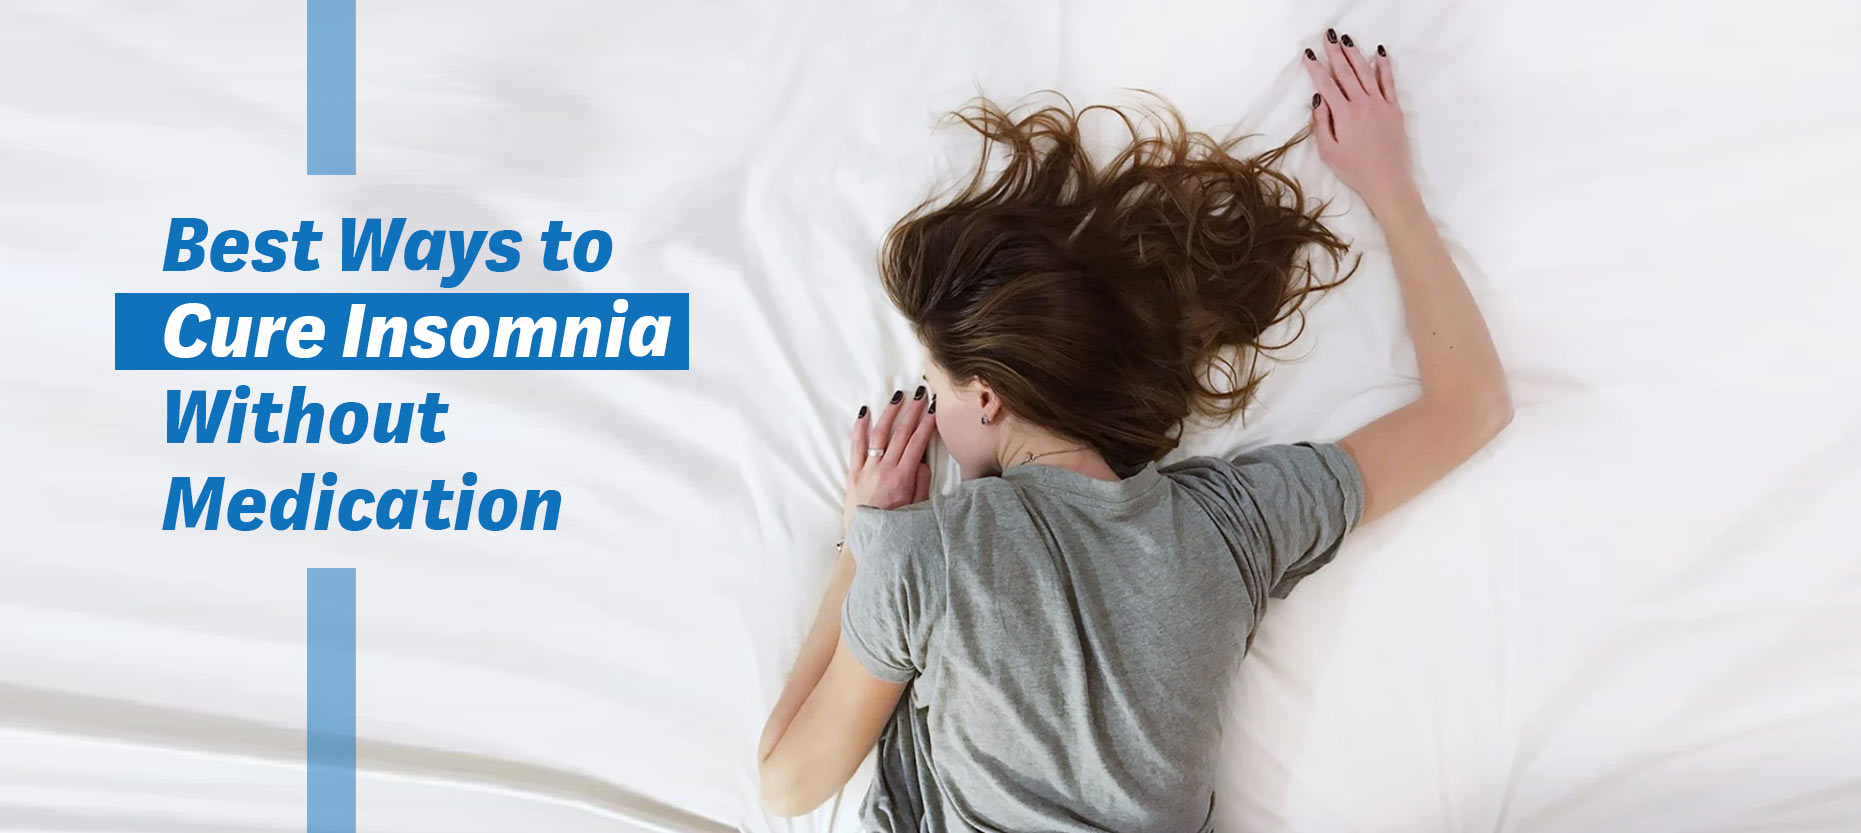 Best Ways to Cure Insomnia Without Medication